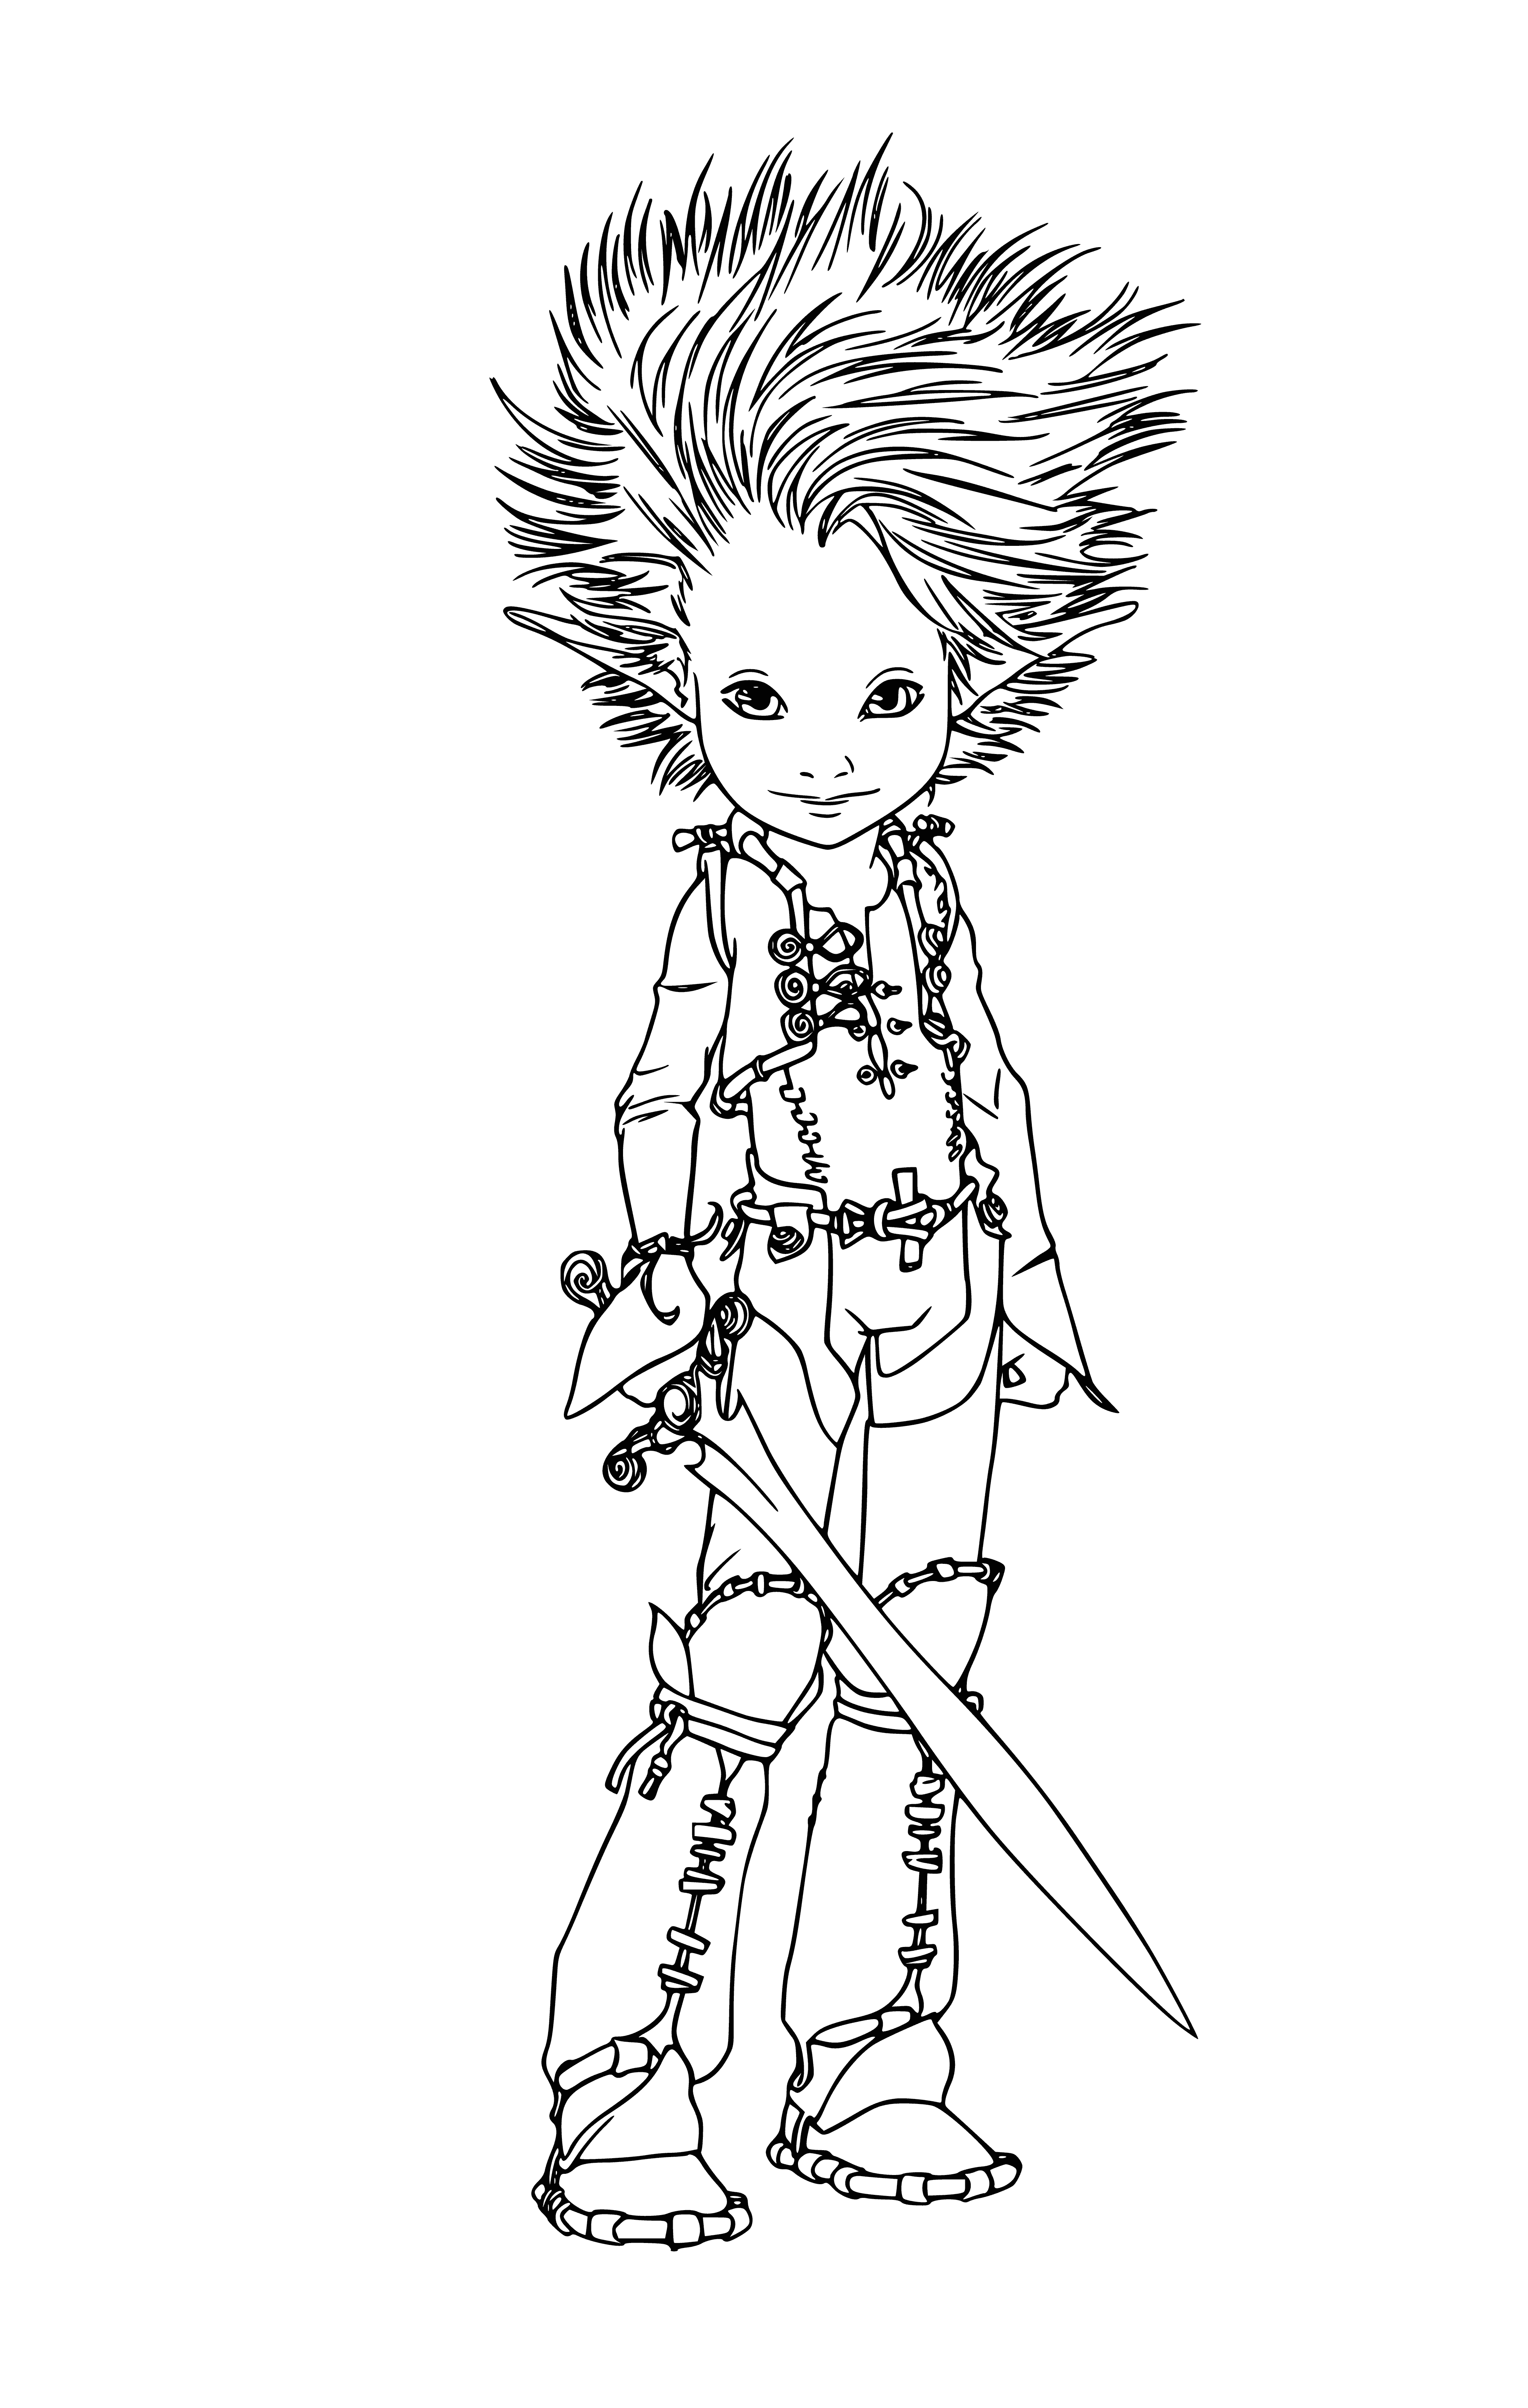 Arthur with a sword coloring page